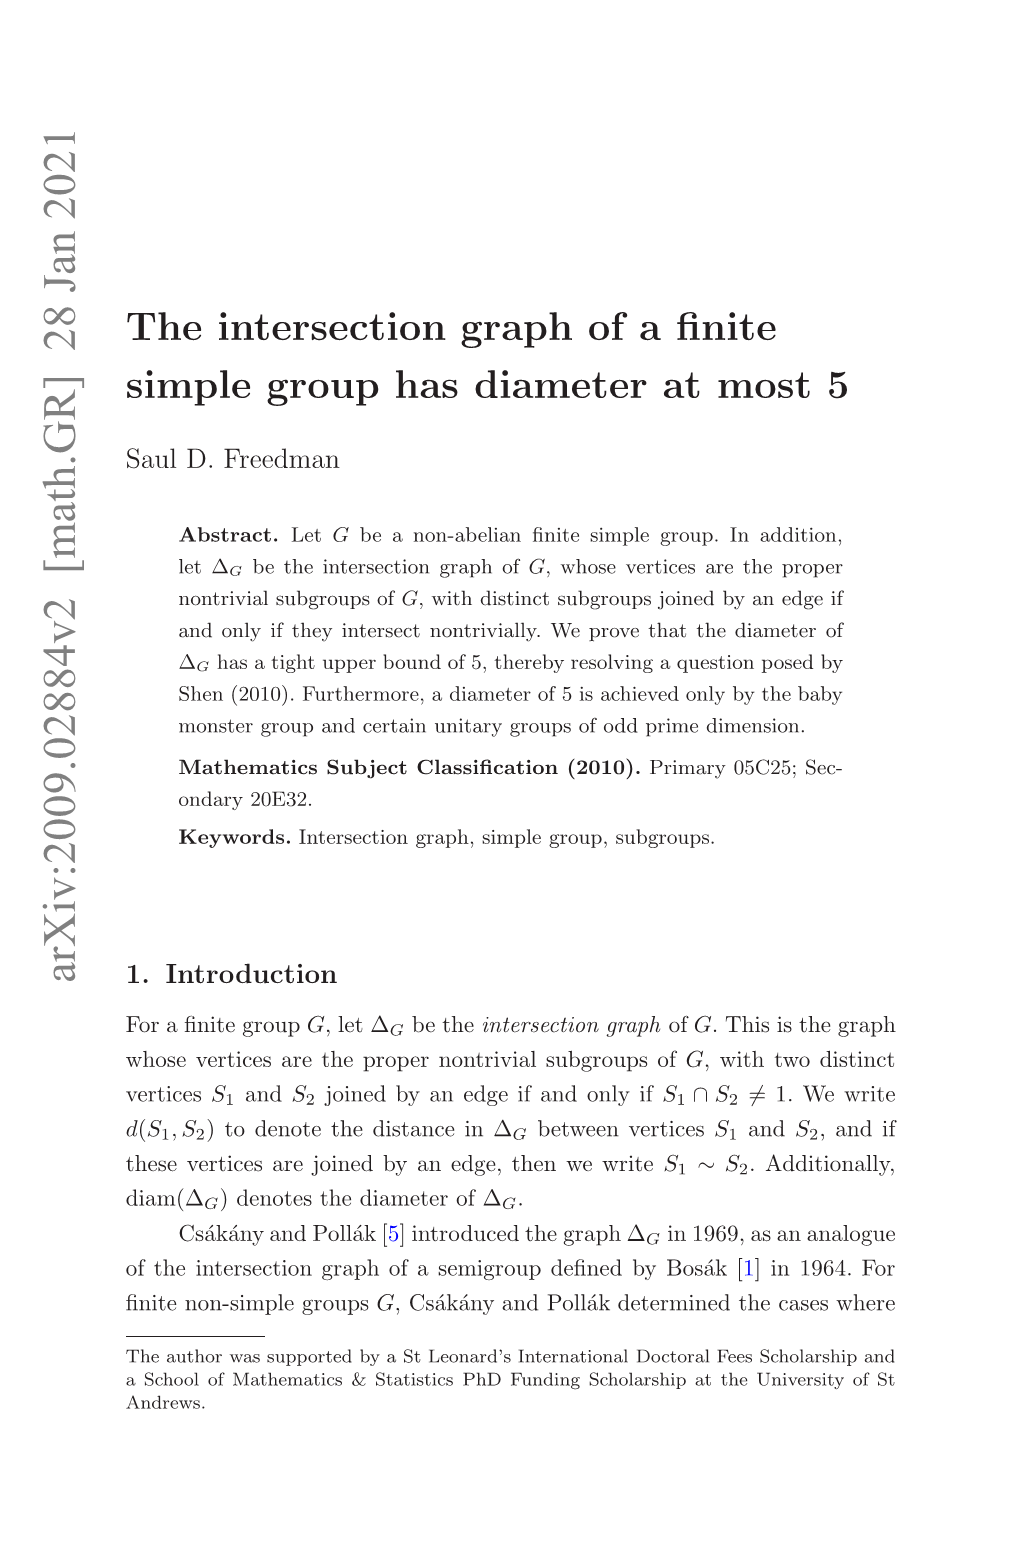 The Intersection Graph of a Finite Simple Group Has Diameter at Most 5